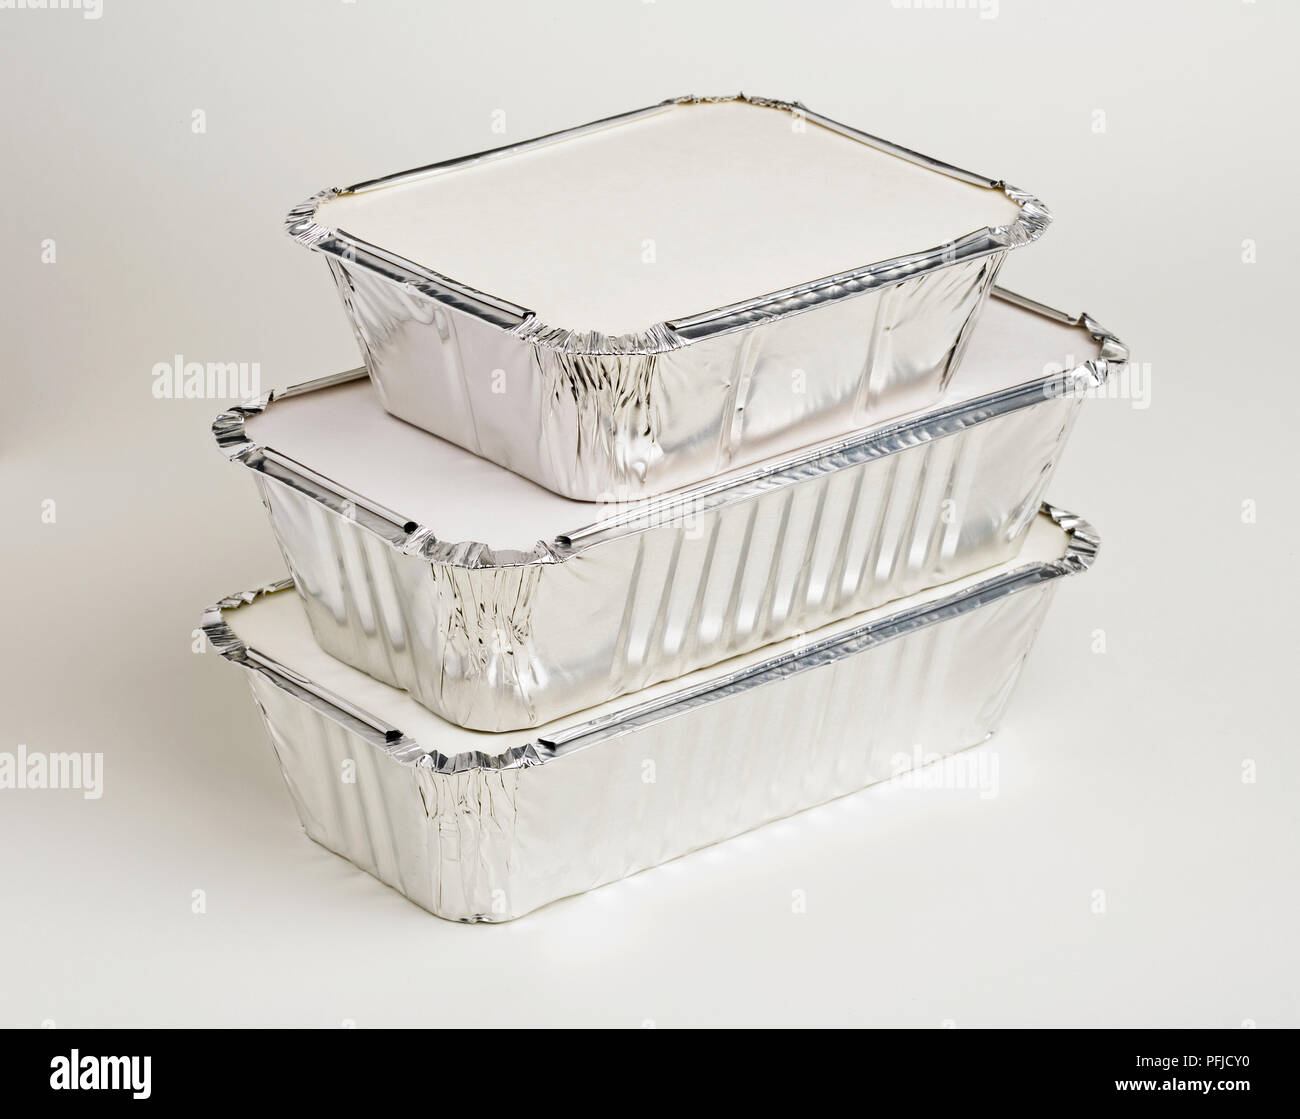 https://c8.alamy.com/comp/PFJCY0/takeaway-food-in-stacked-aluminium-containers-PFJCY0.jpg